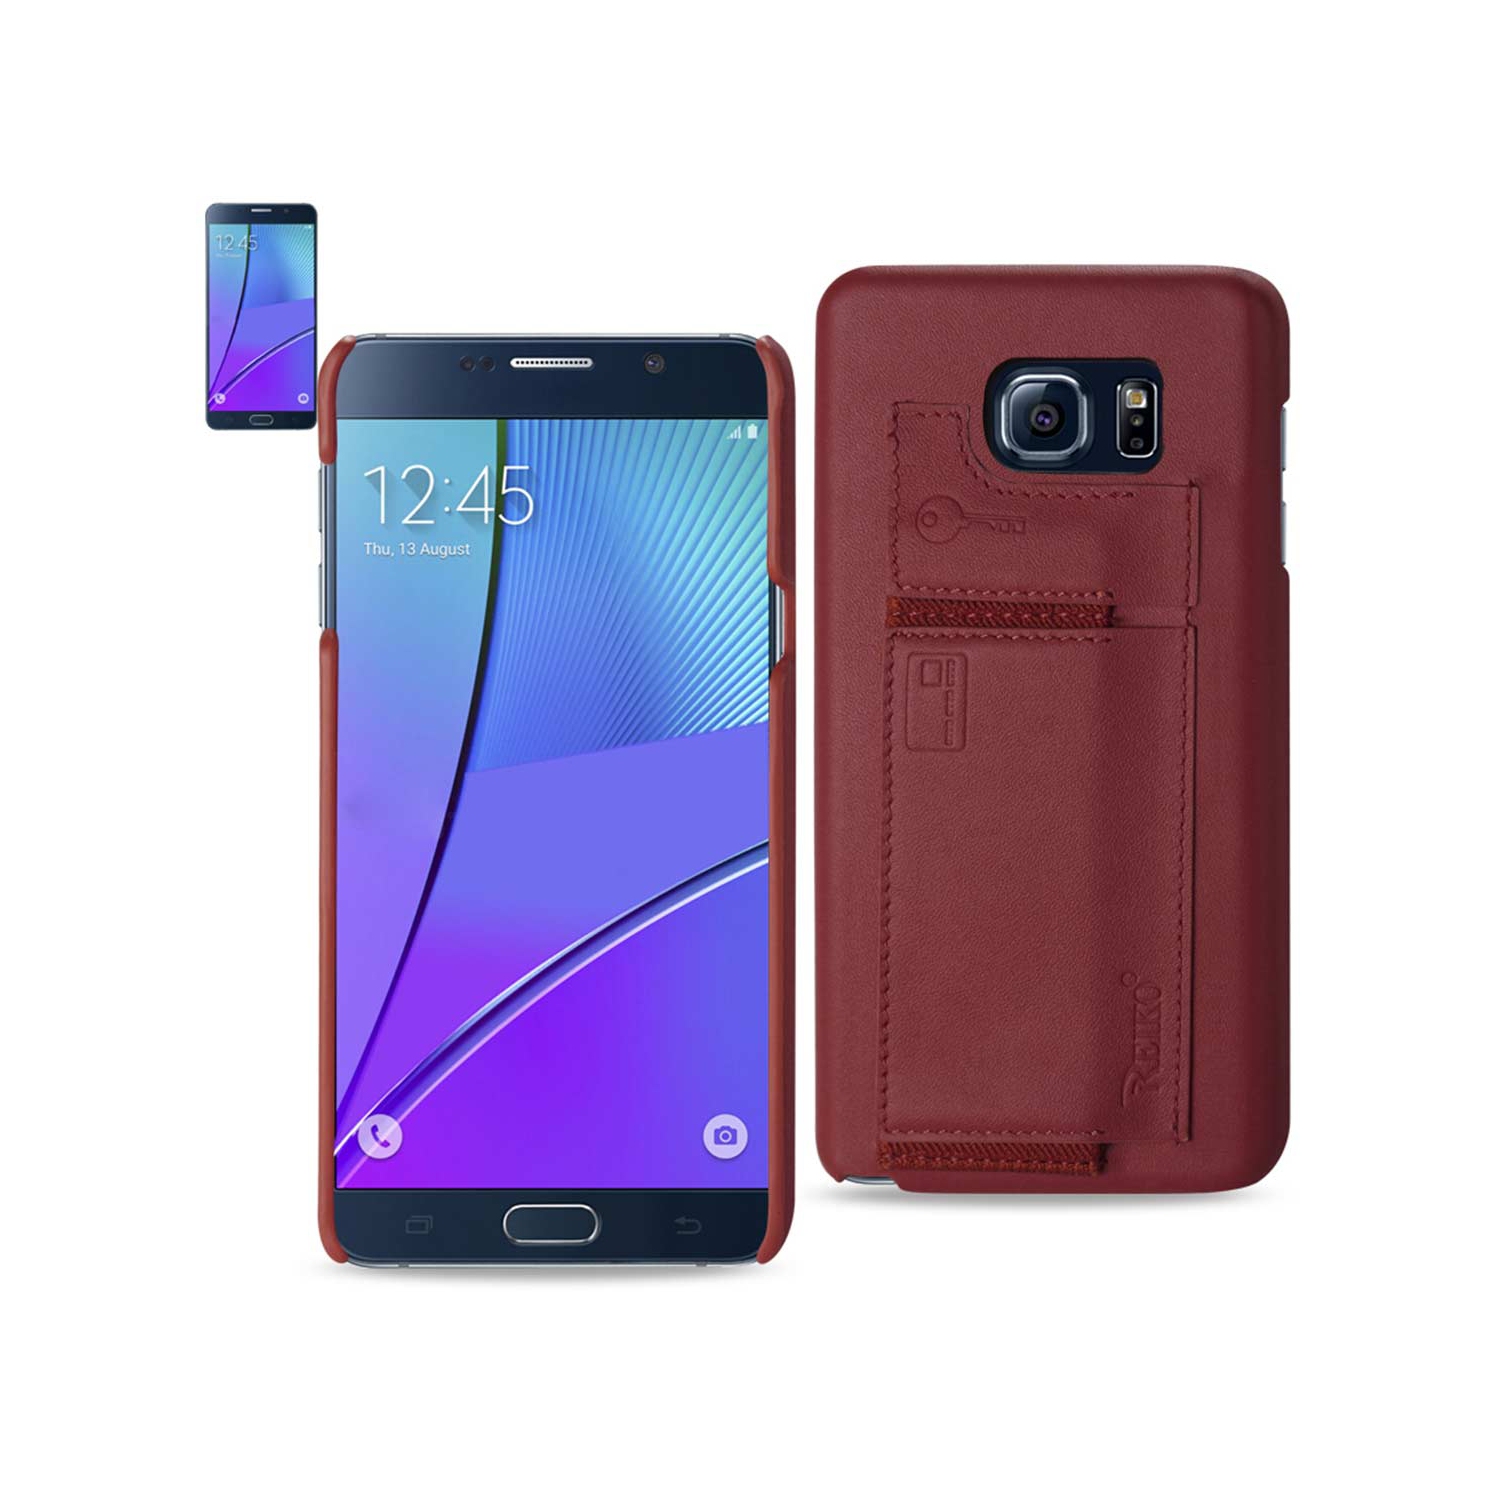 Reiko Samsung Galaxy Note 5 Rfid Genuine Leather Case Protection And Key Holder